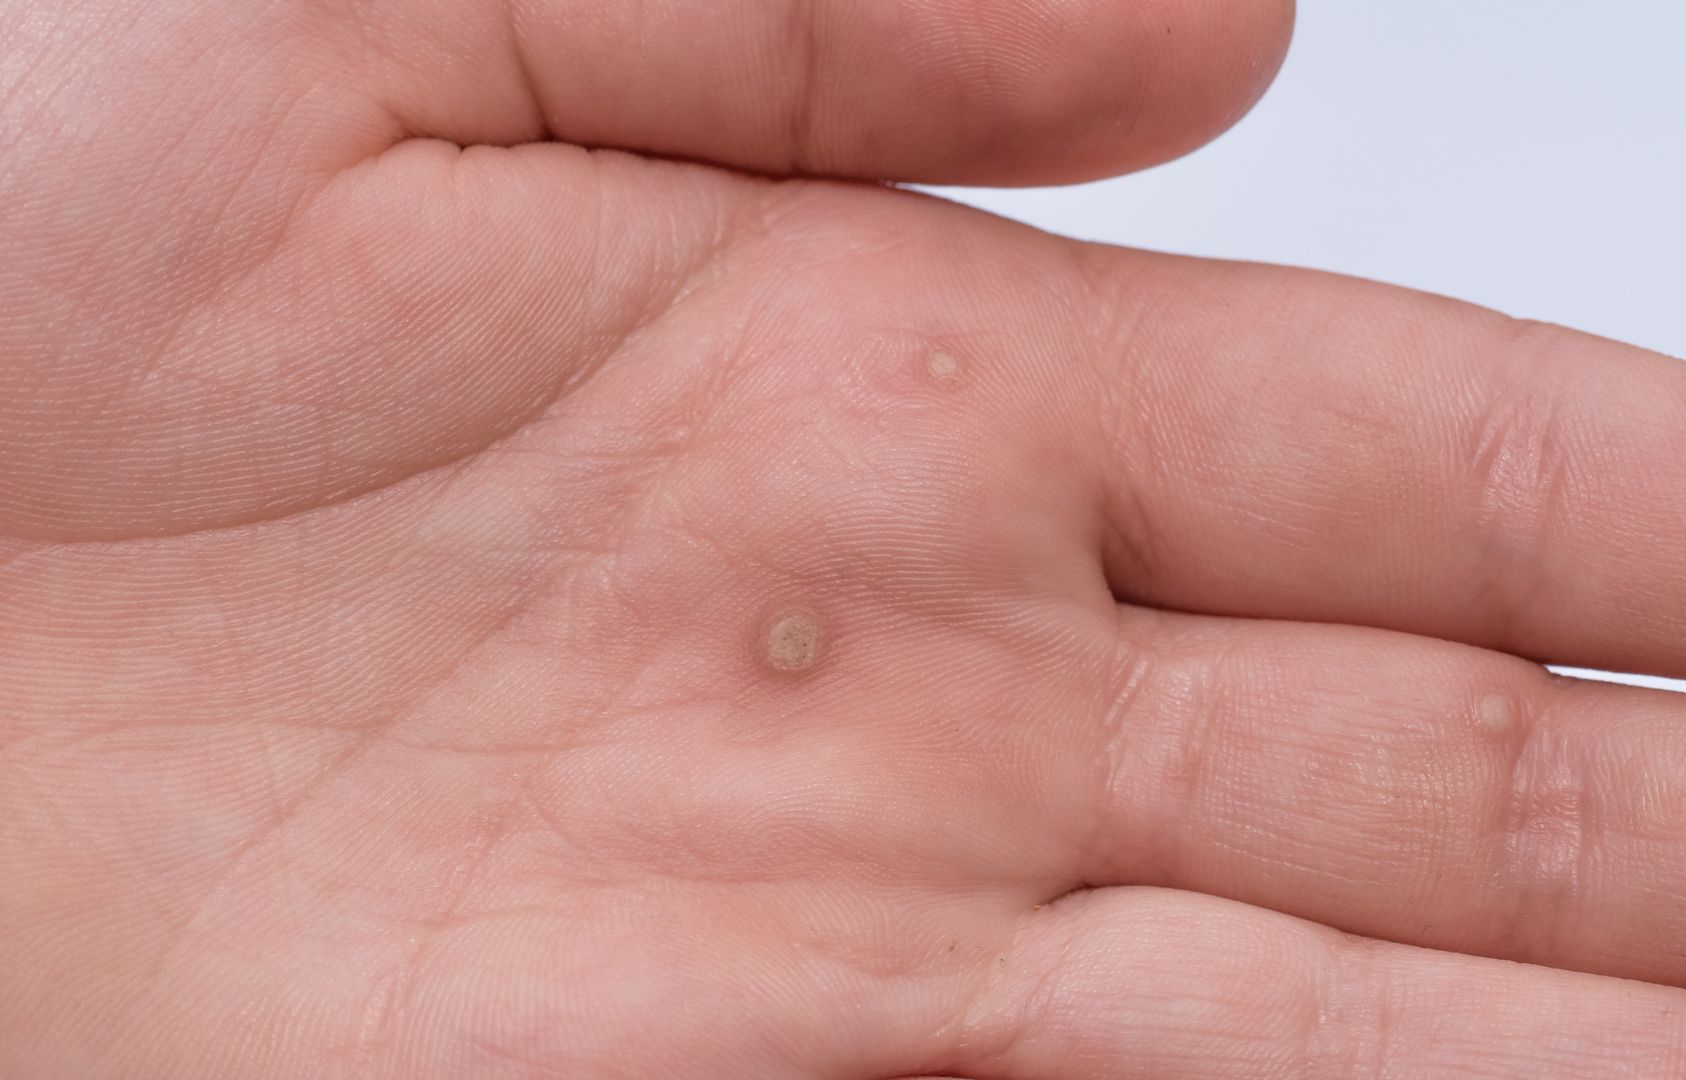 hpv warts in fingers